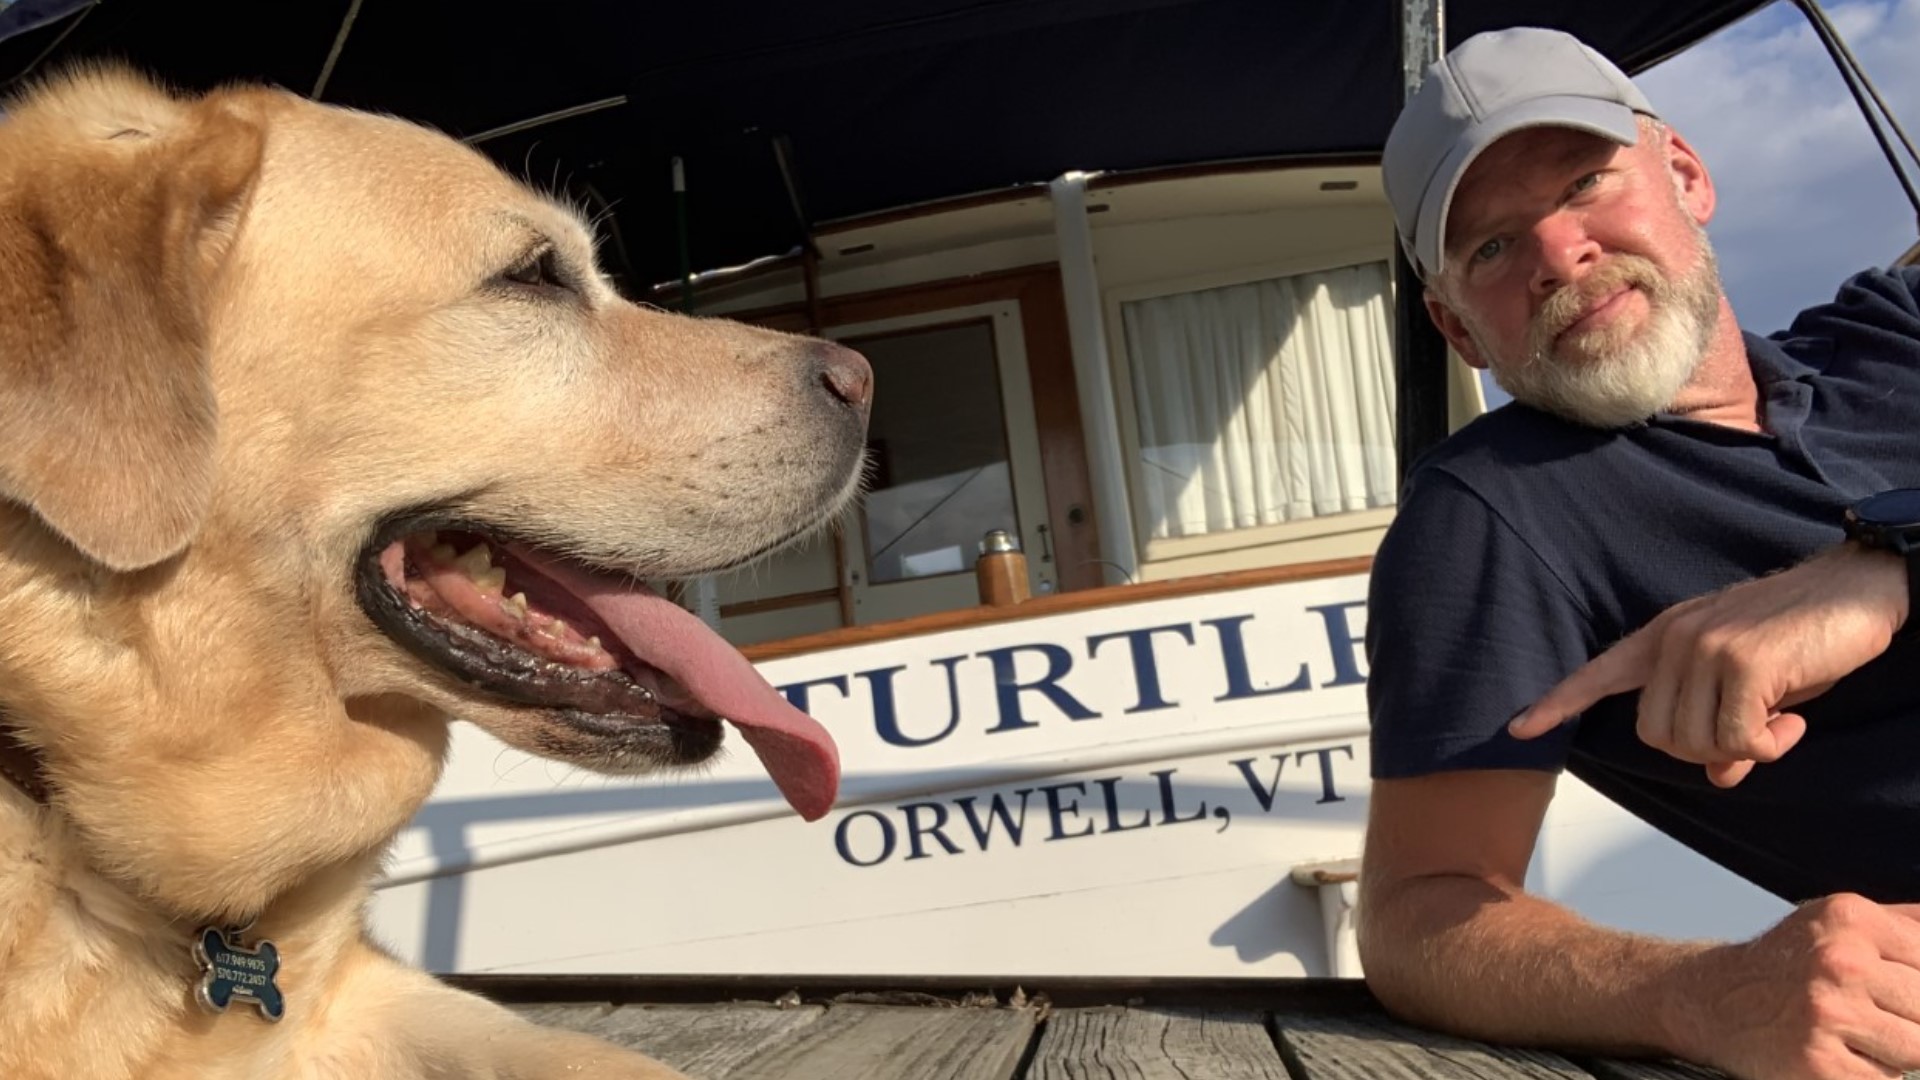 Man & his dog take boating adventure to help nephew fight cancer 